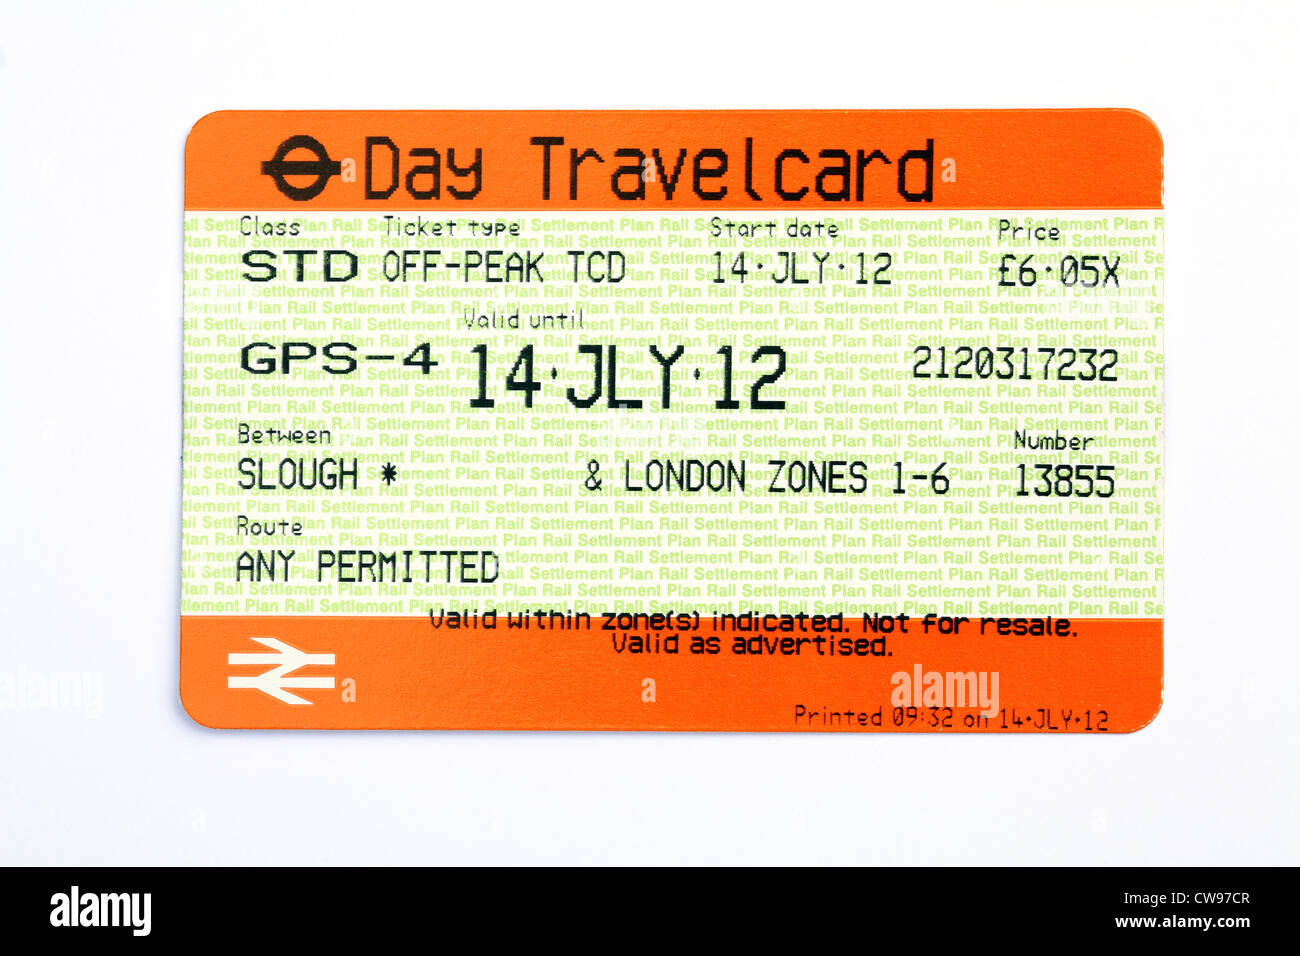 one day travel card southern rail